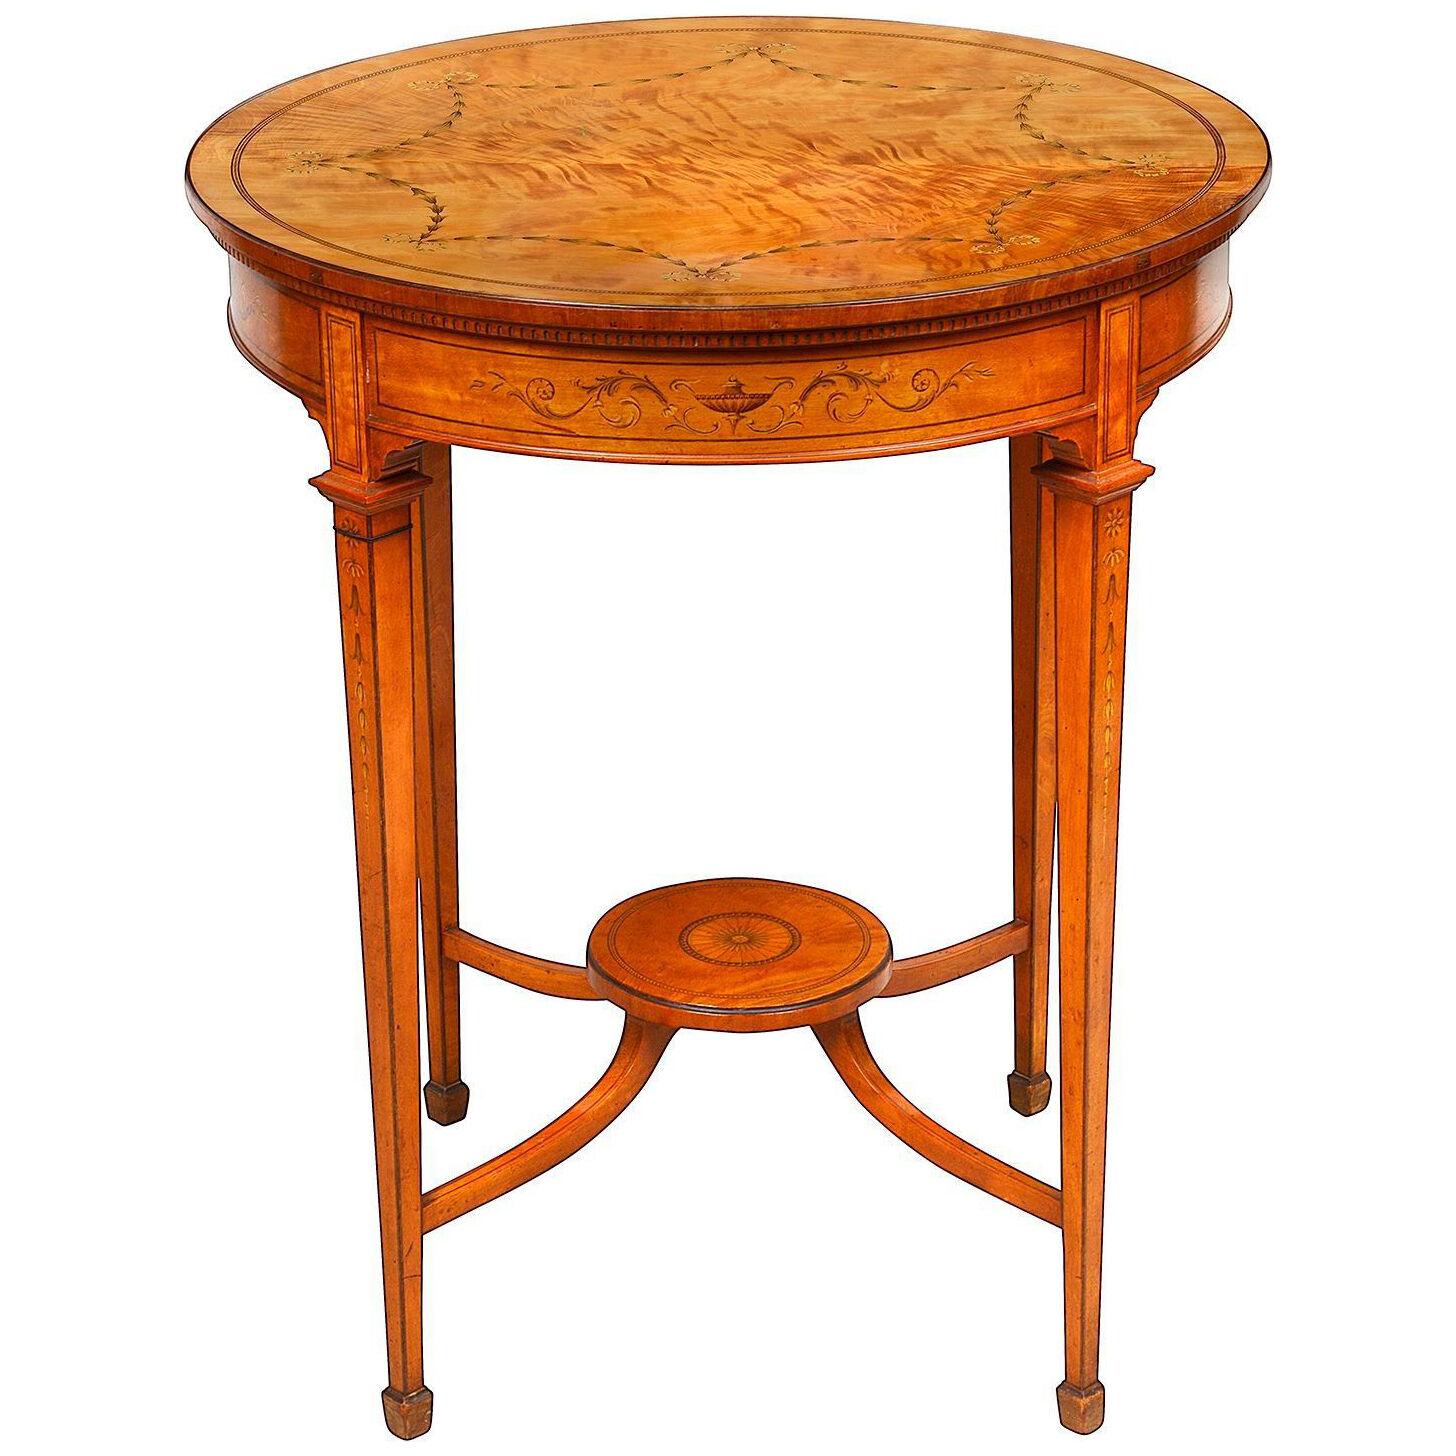 A Sheraton revival satinwood inlaid side table, 19th century.